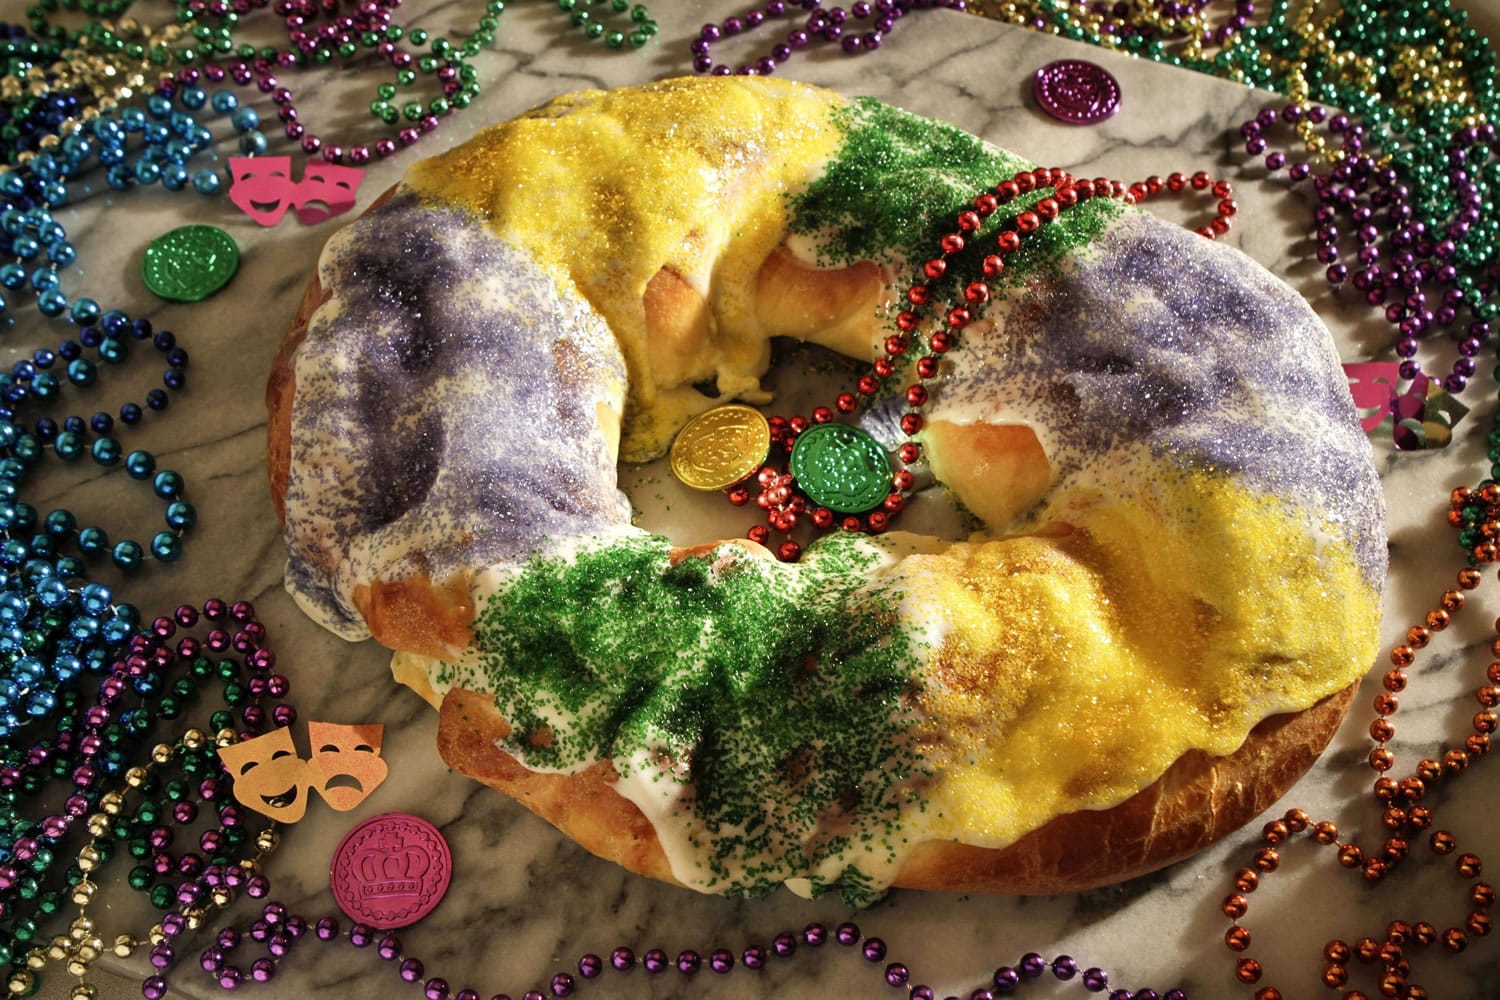 For many, a New Orleans-style Mardi Gras is simply not complete without a king cake.